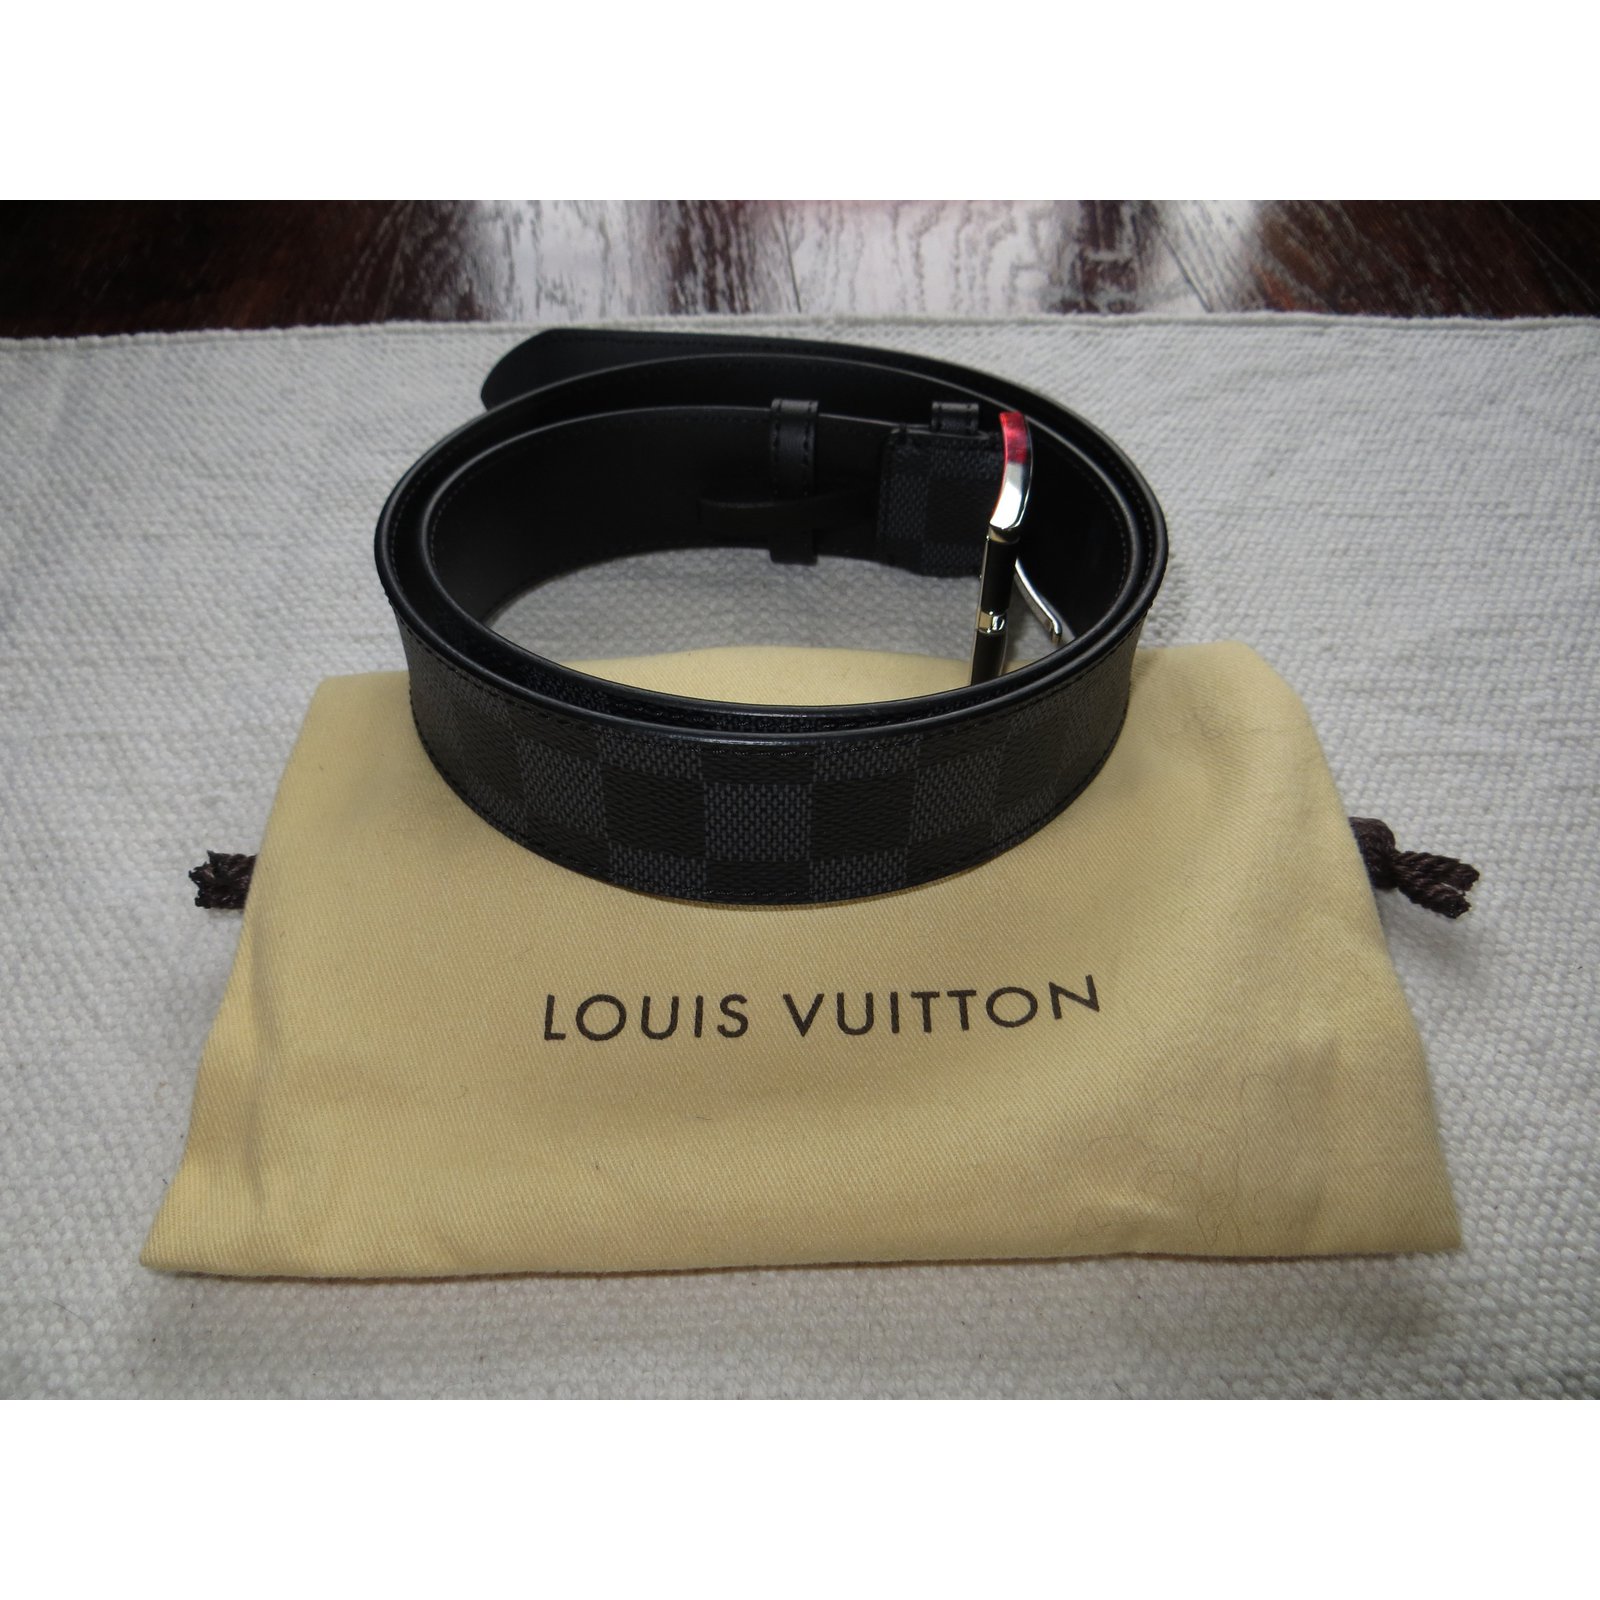 Authentic Louis Vuitton Belt M9694 95/38 Black CA0141 Free Shipping  Pre-owned